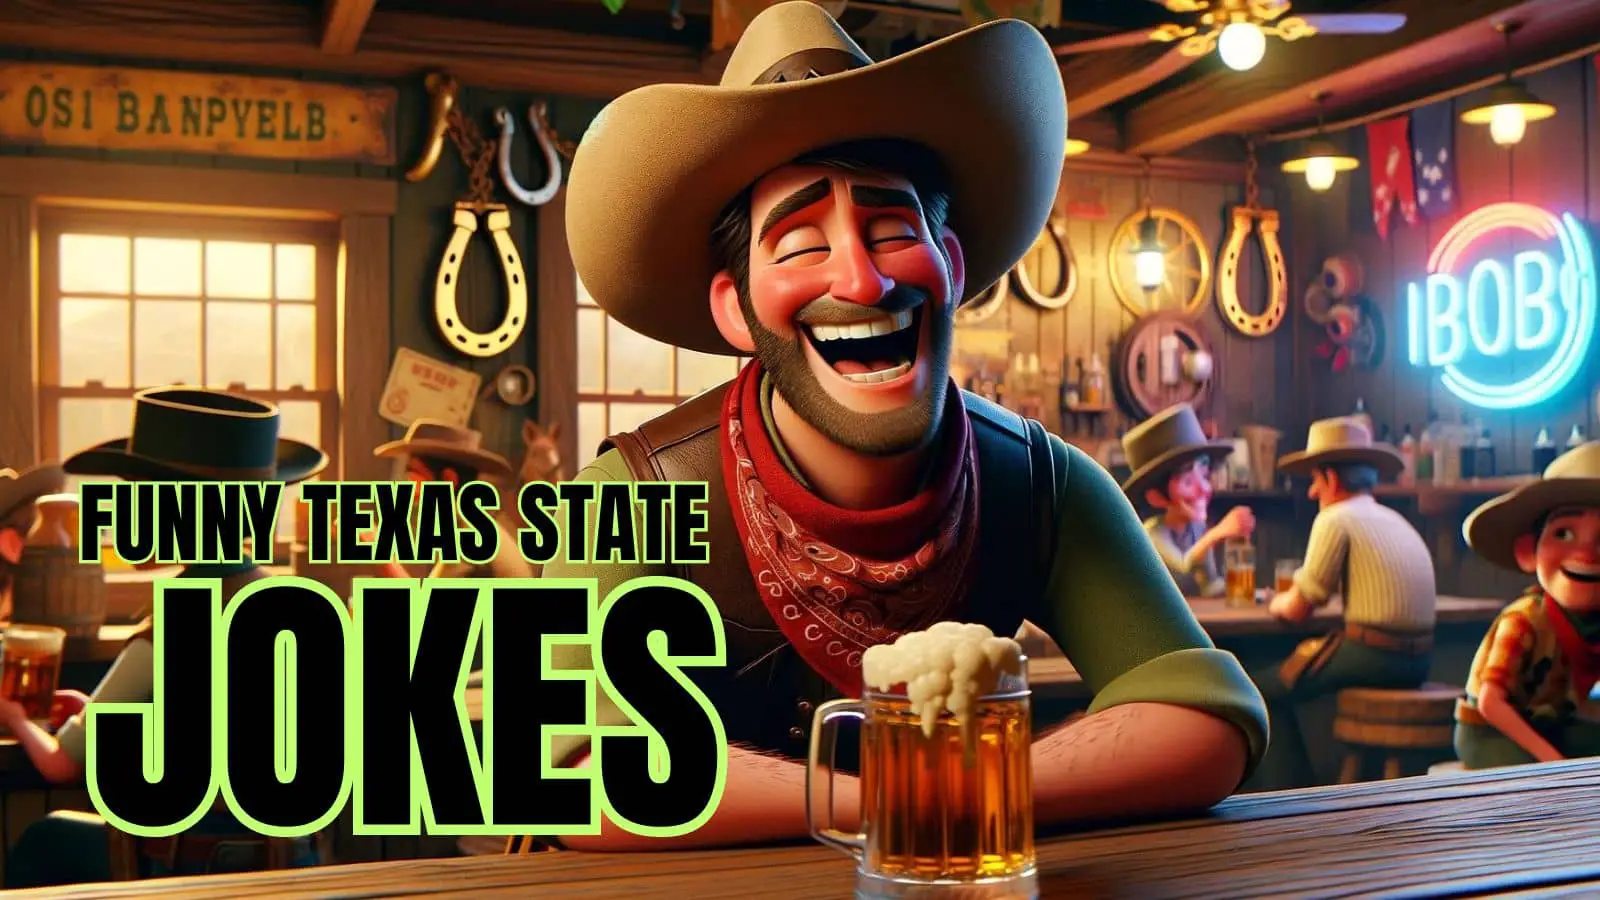 Funny Texas Jokes on Lone Star State